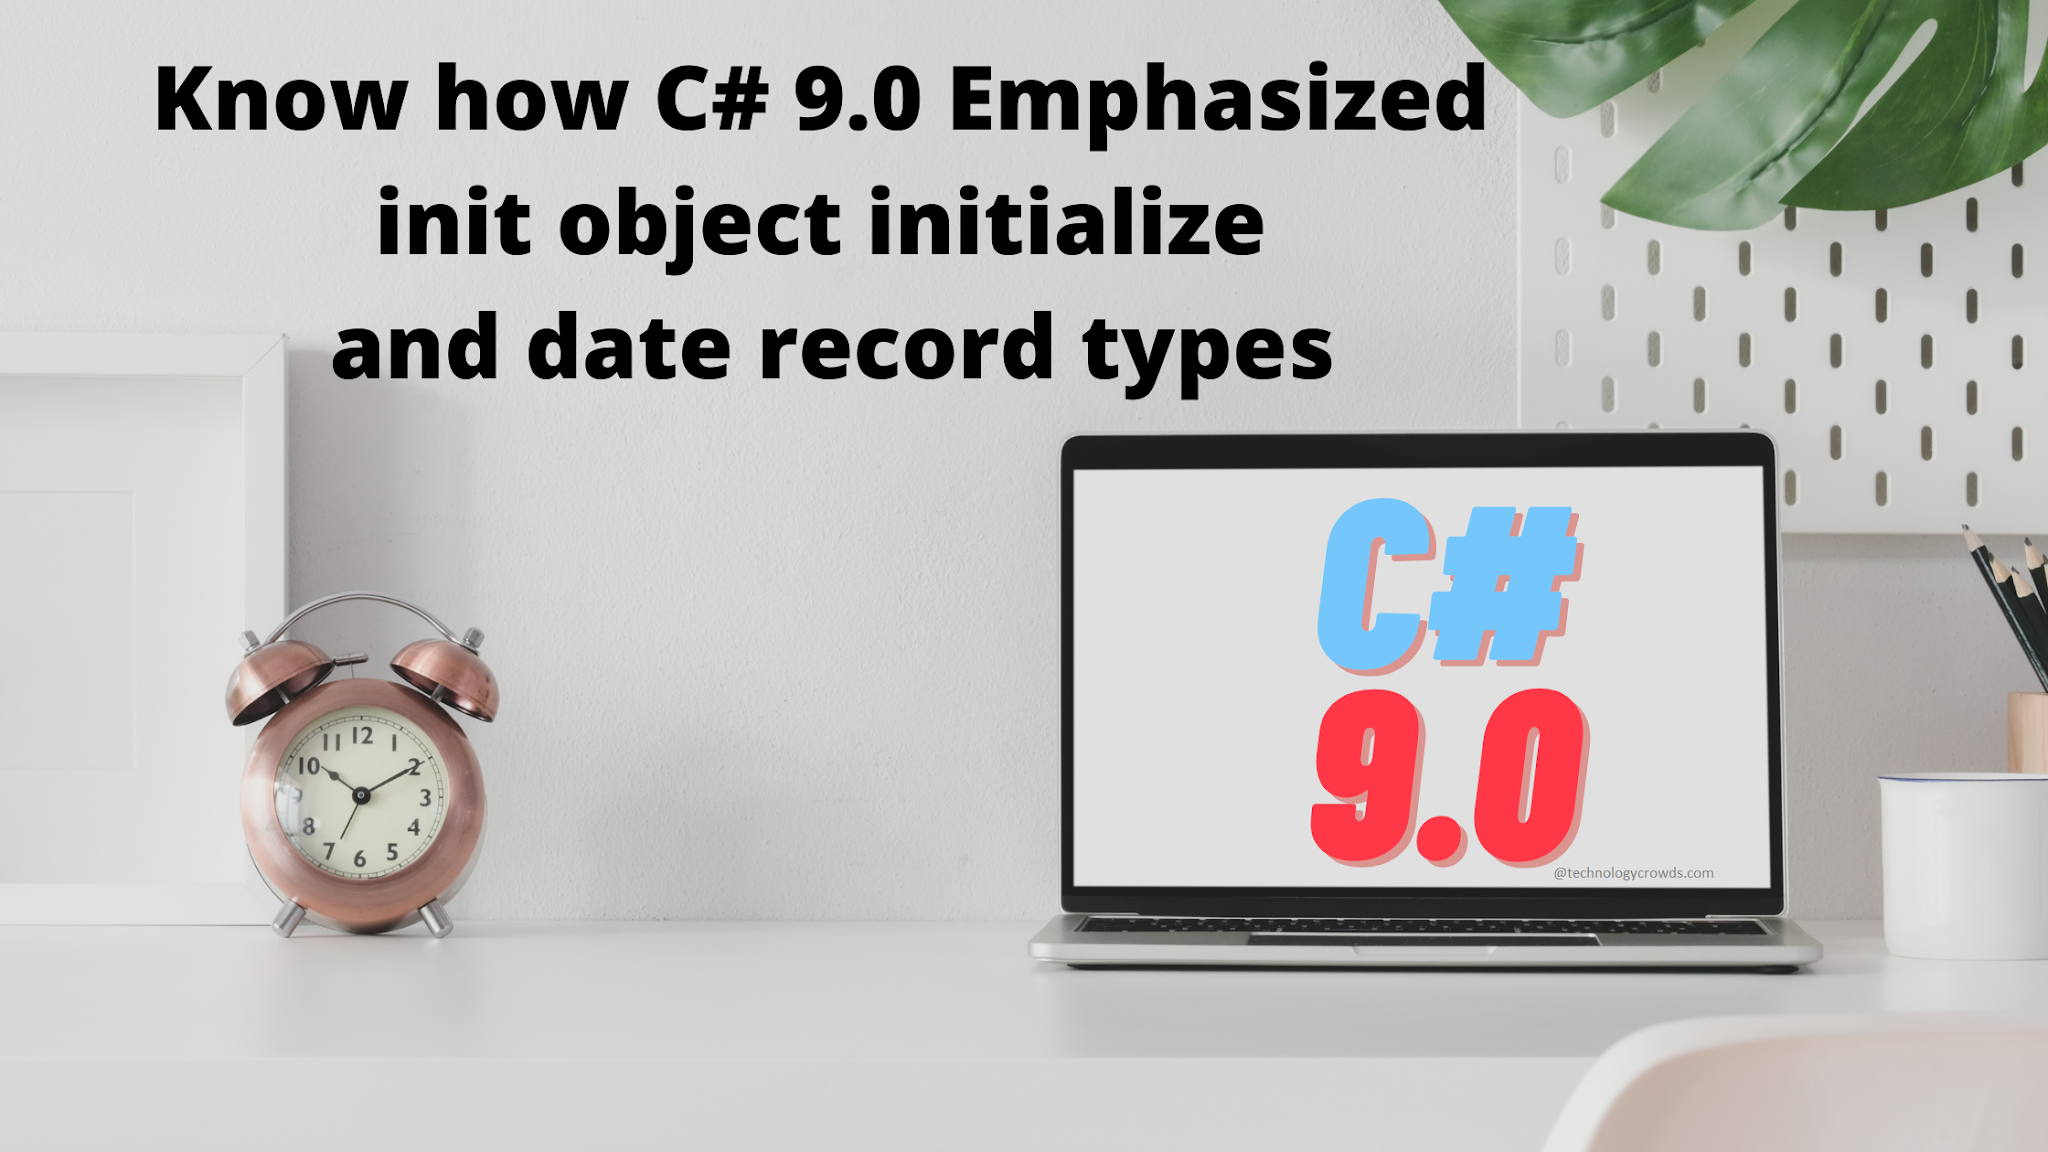 Know how C# 9.0 has emphasized init object initialize and date record types